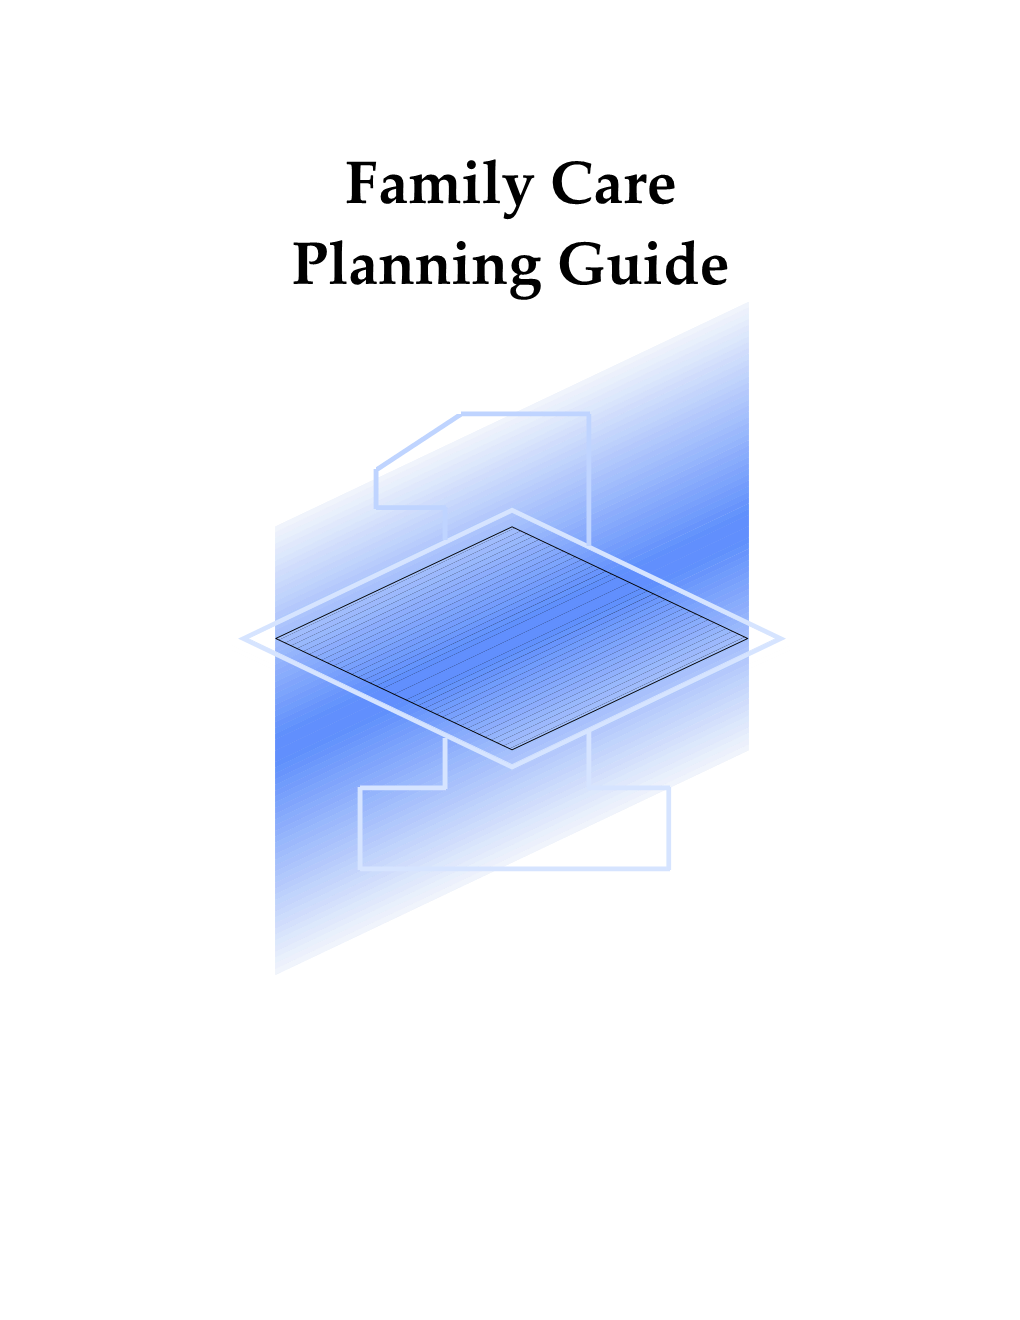 Family Care Planning Guide